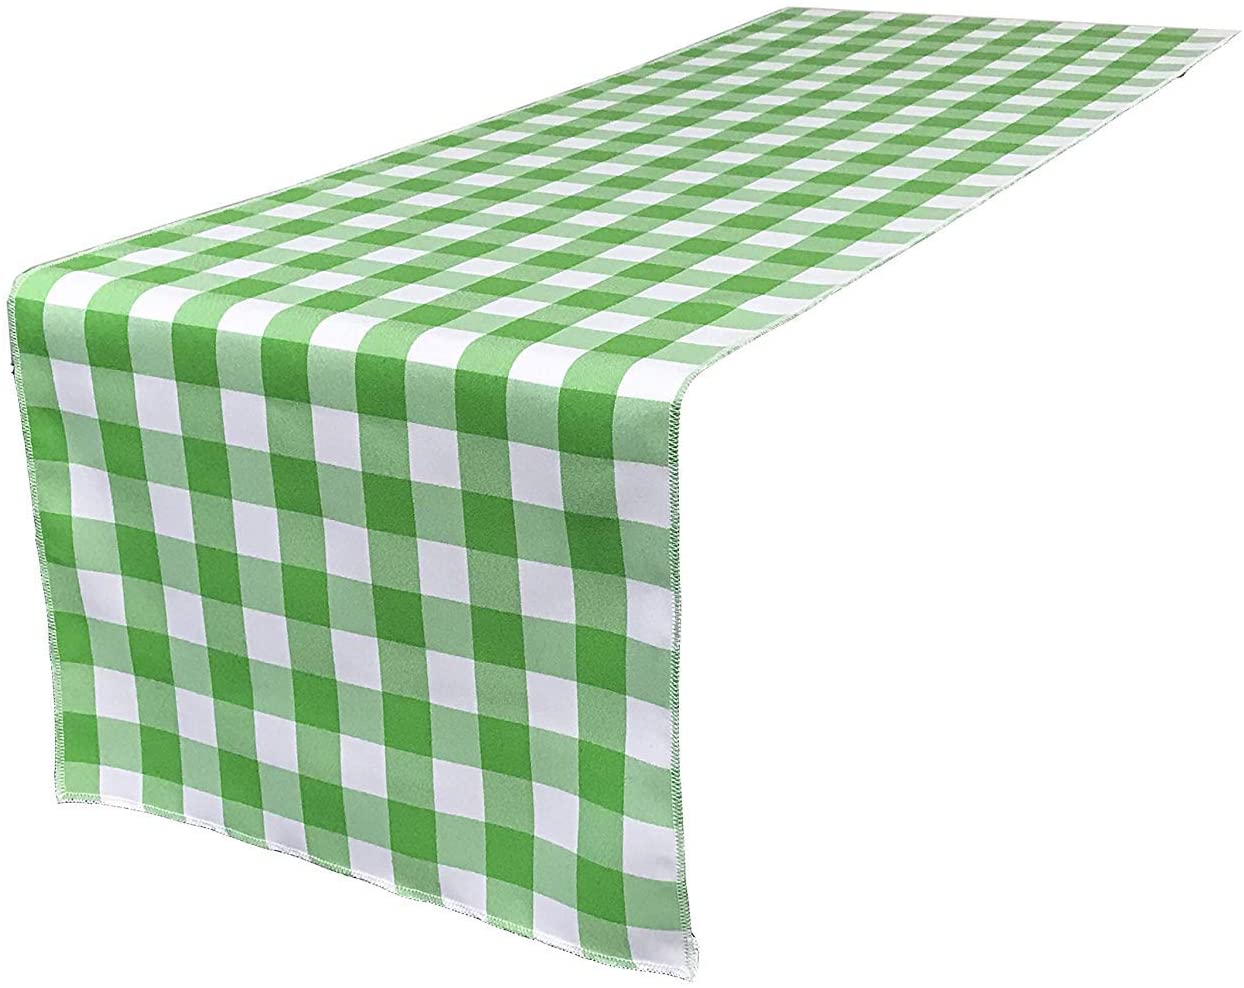 12" Wide by The Size of Your Choice, Polyester Poplin Gingham, Checkered, Plaid Table Runner (White & Lime,